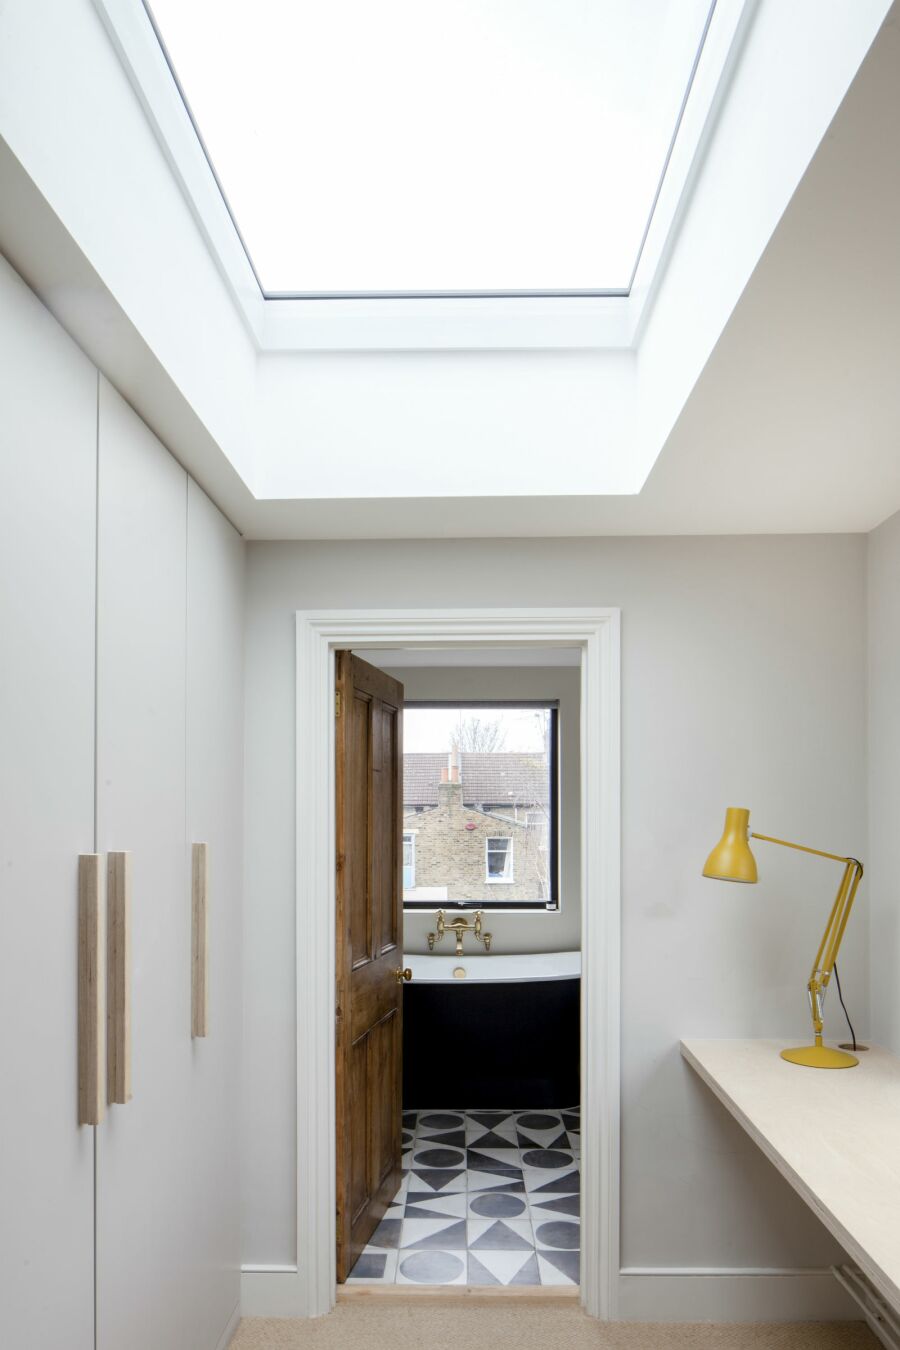 Room with skylight that looks through to a bathroom with a roll-top bathtub with brass taps.